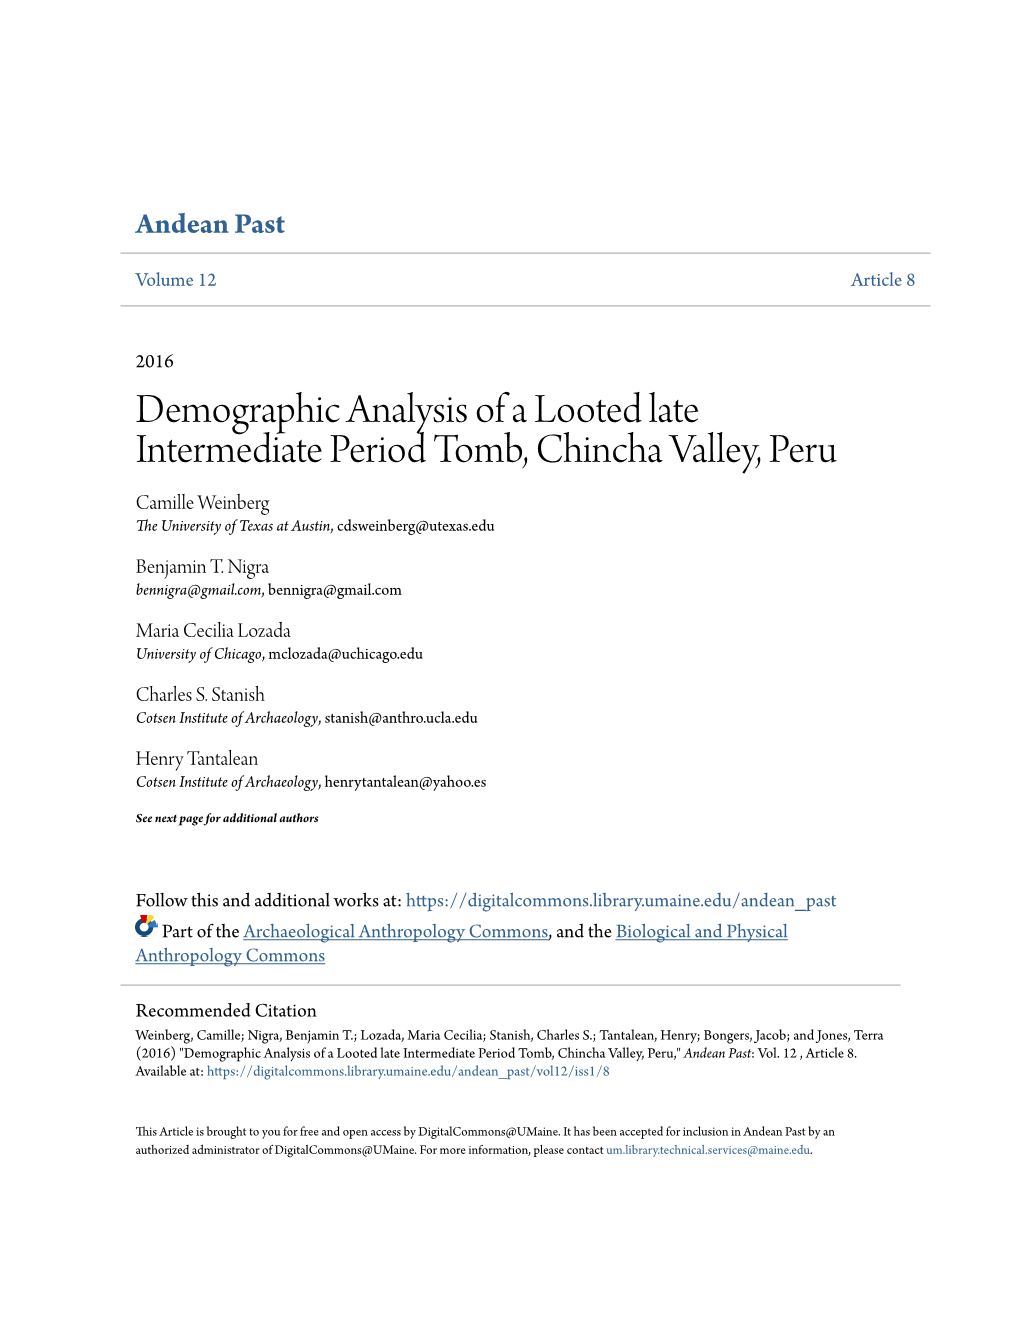 Demographic Analysis of a Looted Late Intermediate Period Tomb, Chincha Valley, Peru Camille Weinberg the University of Texas at Austin, Cdsweinberg@Utexas.Edu